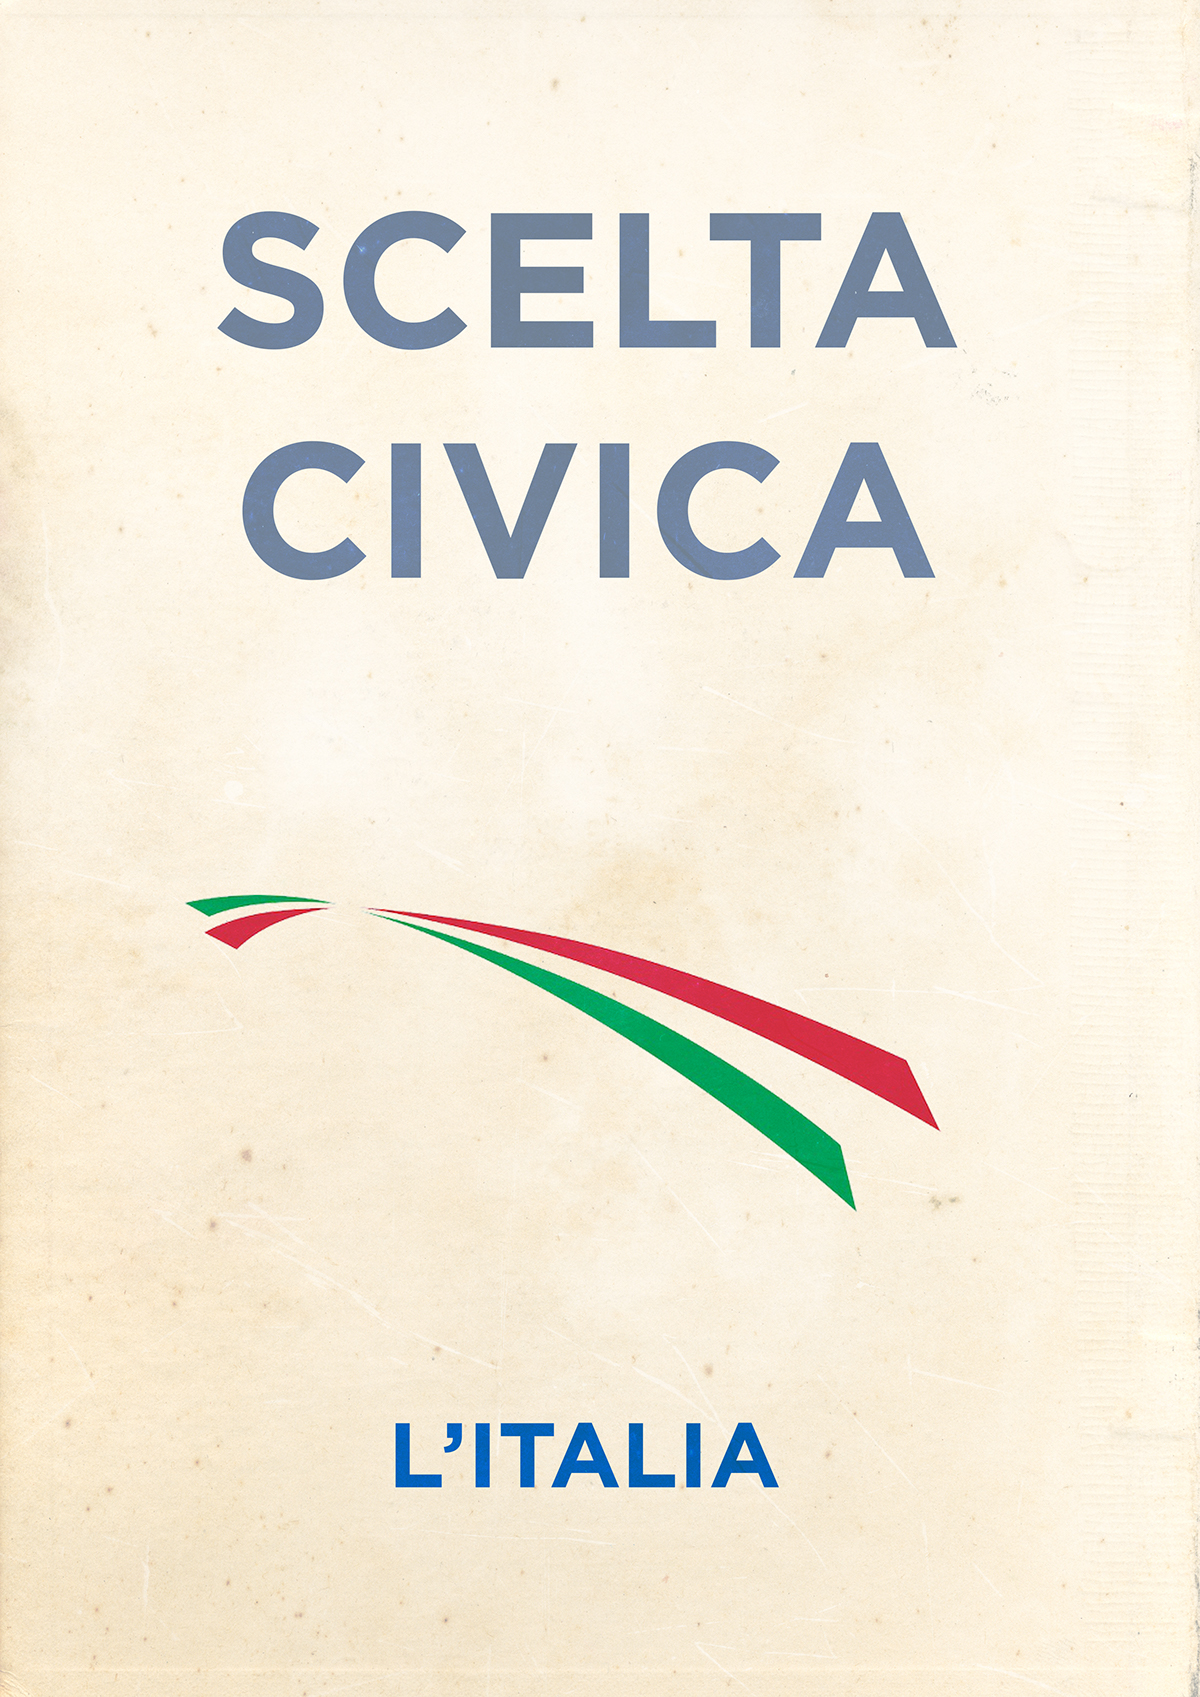 poster politic Italy concept